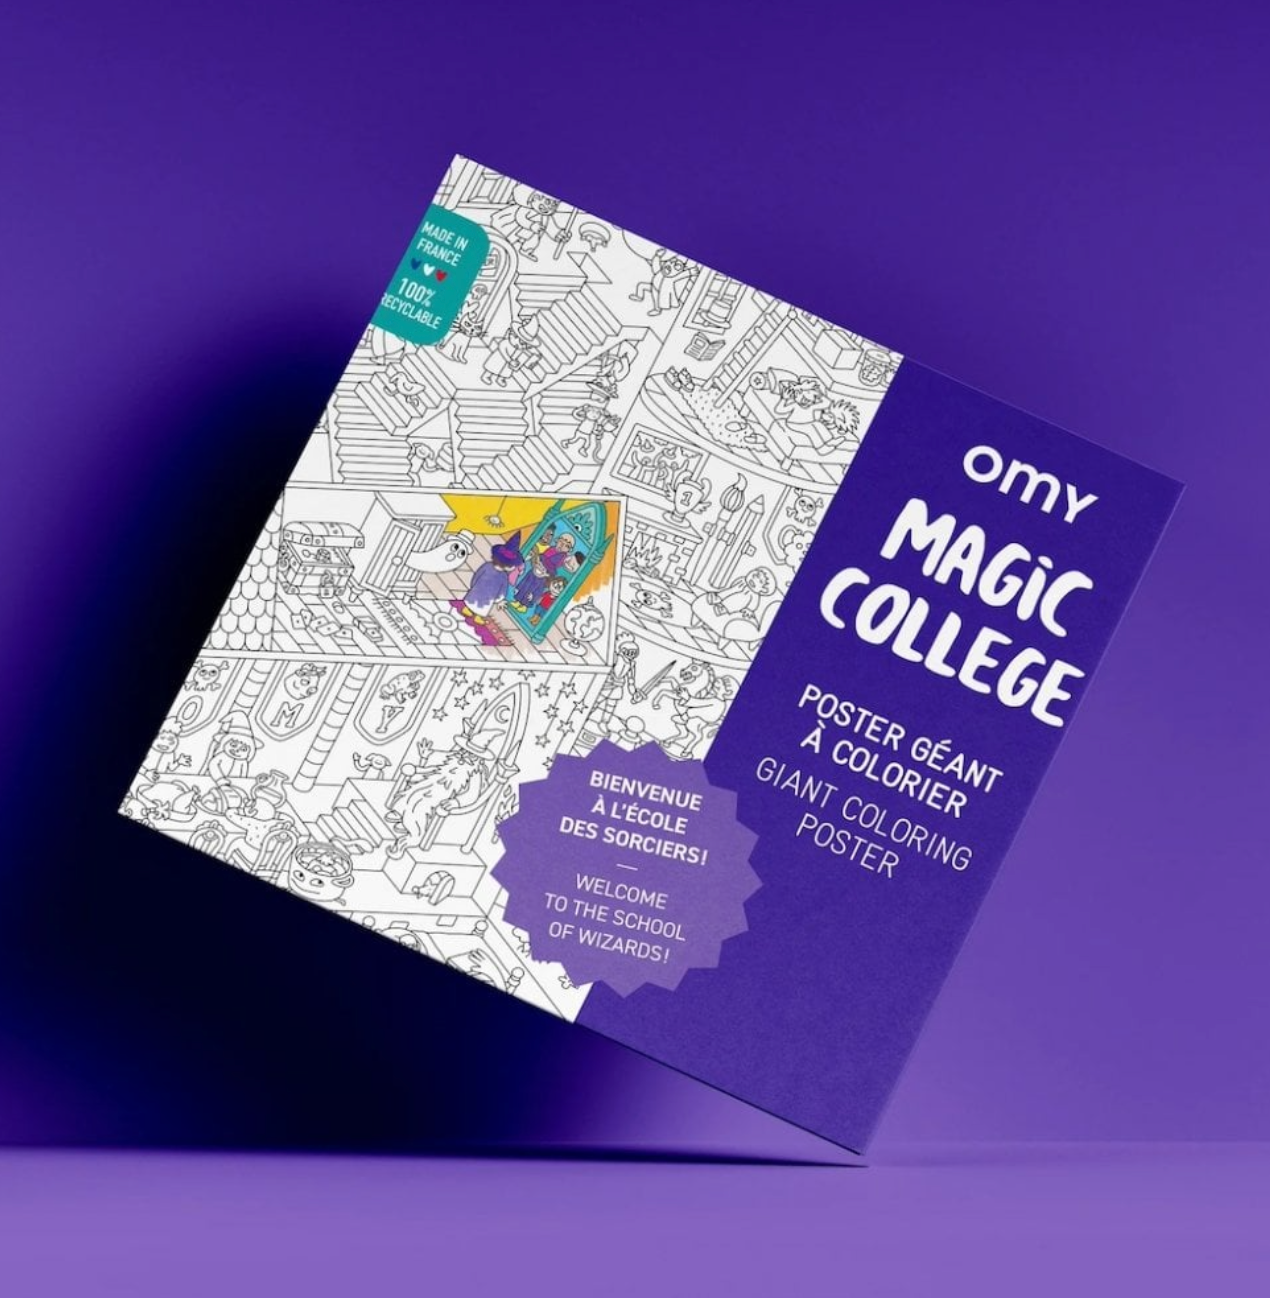 Giant Colour Poster  - Magic College